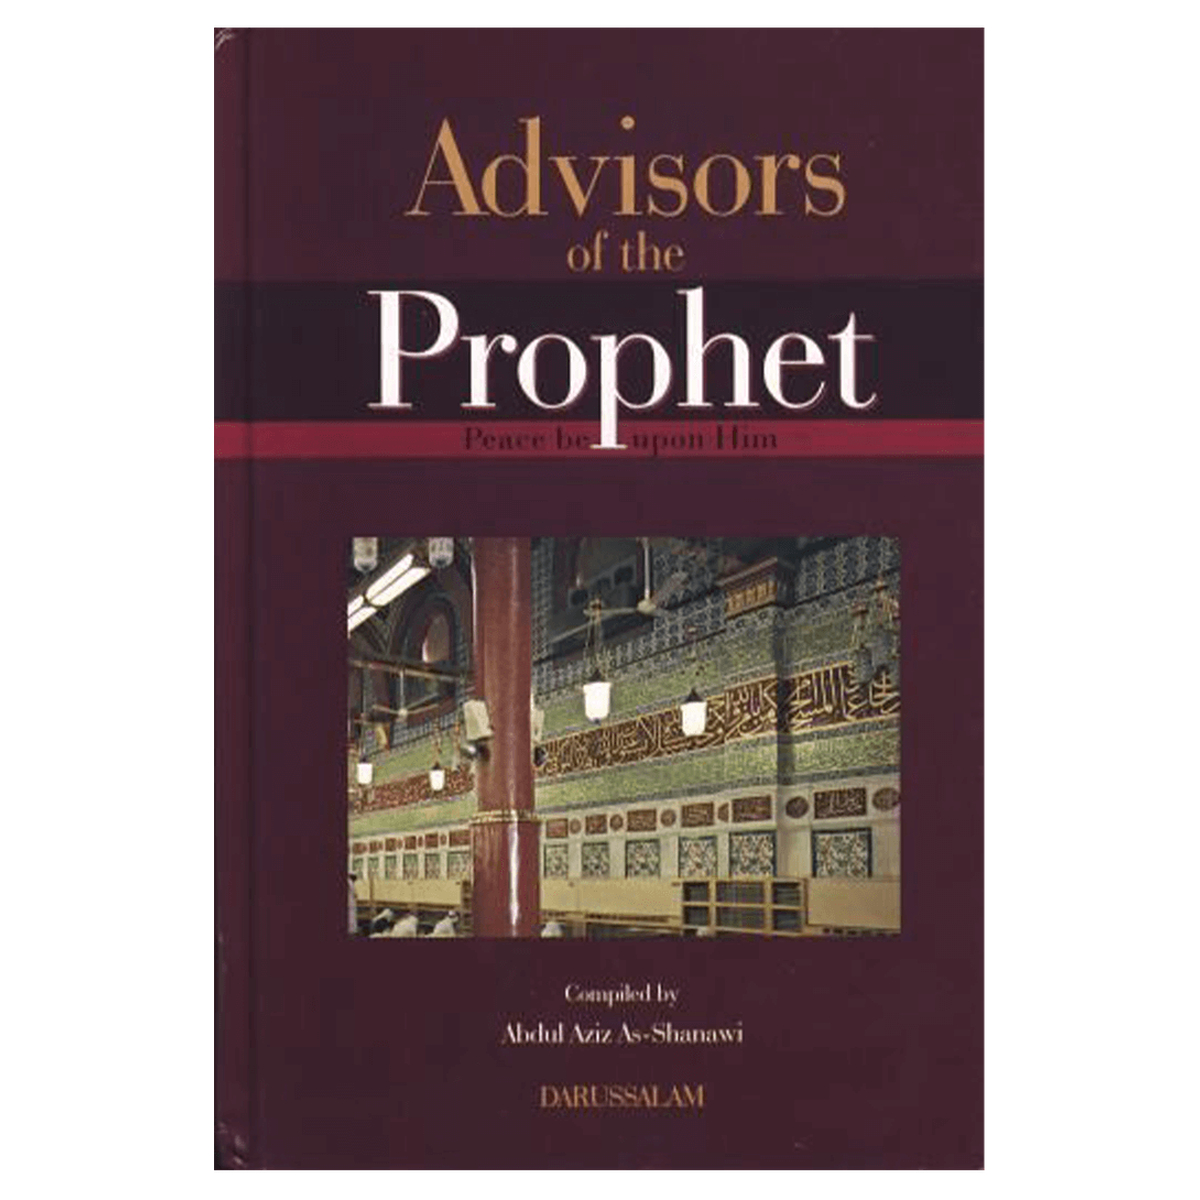 Advisors Of The Prophet(peace be upon him)